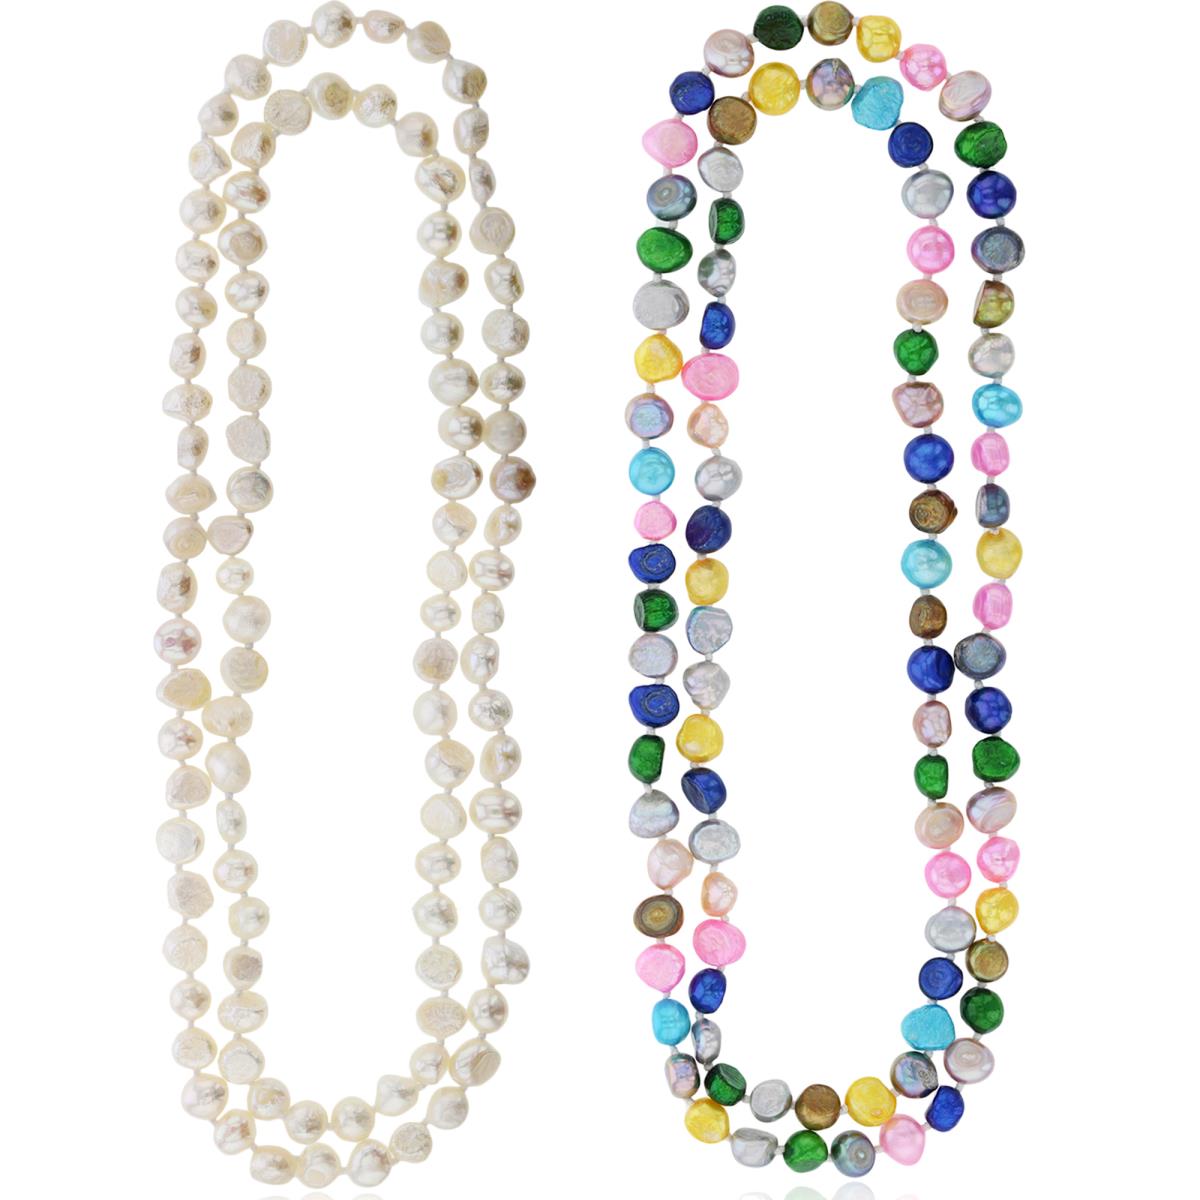 8-9mm Assorted White & Multi Color Fresh Water Pearls 60" Necklace Set